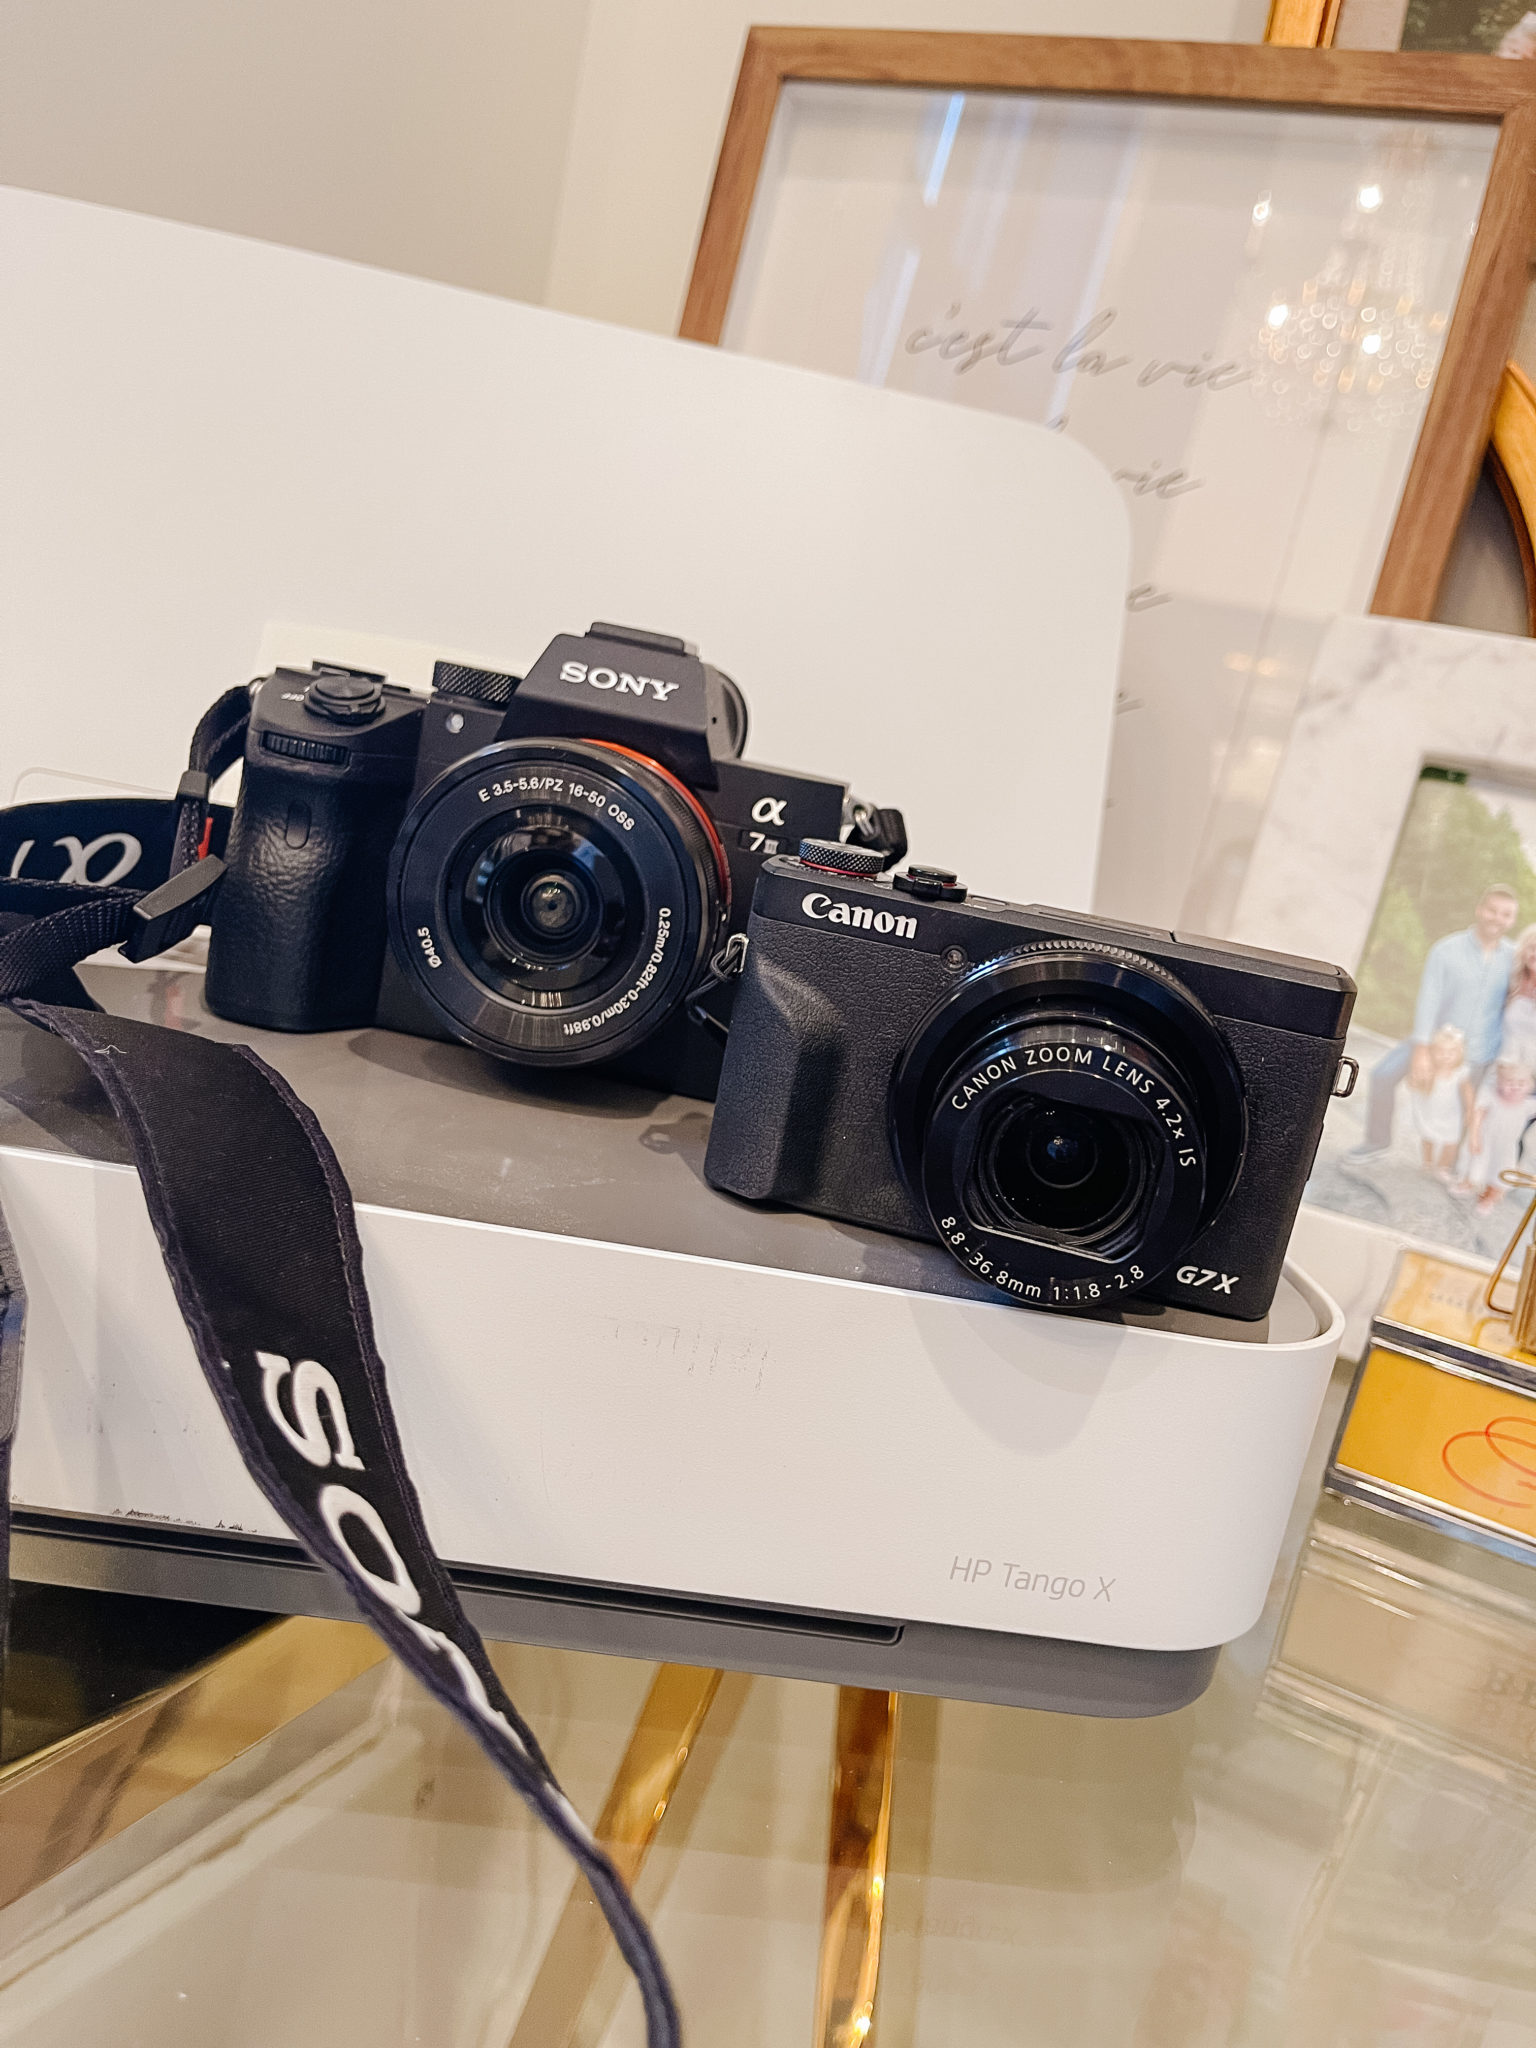 Best digital cameras, Canon PowerShot G7 and Sony Alpha a7 III. 